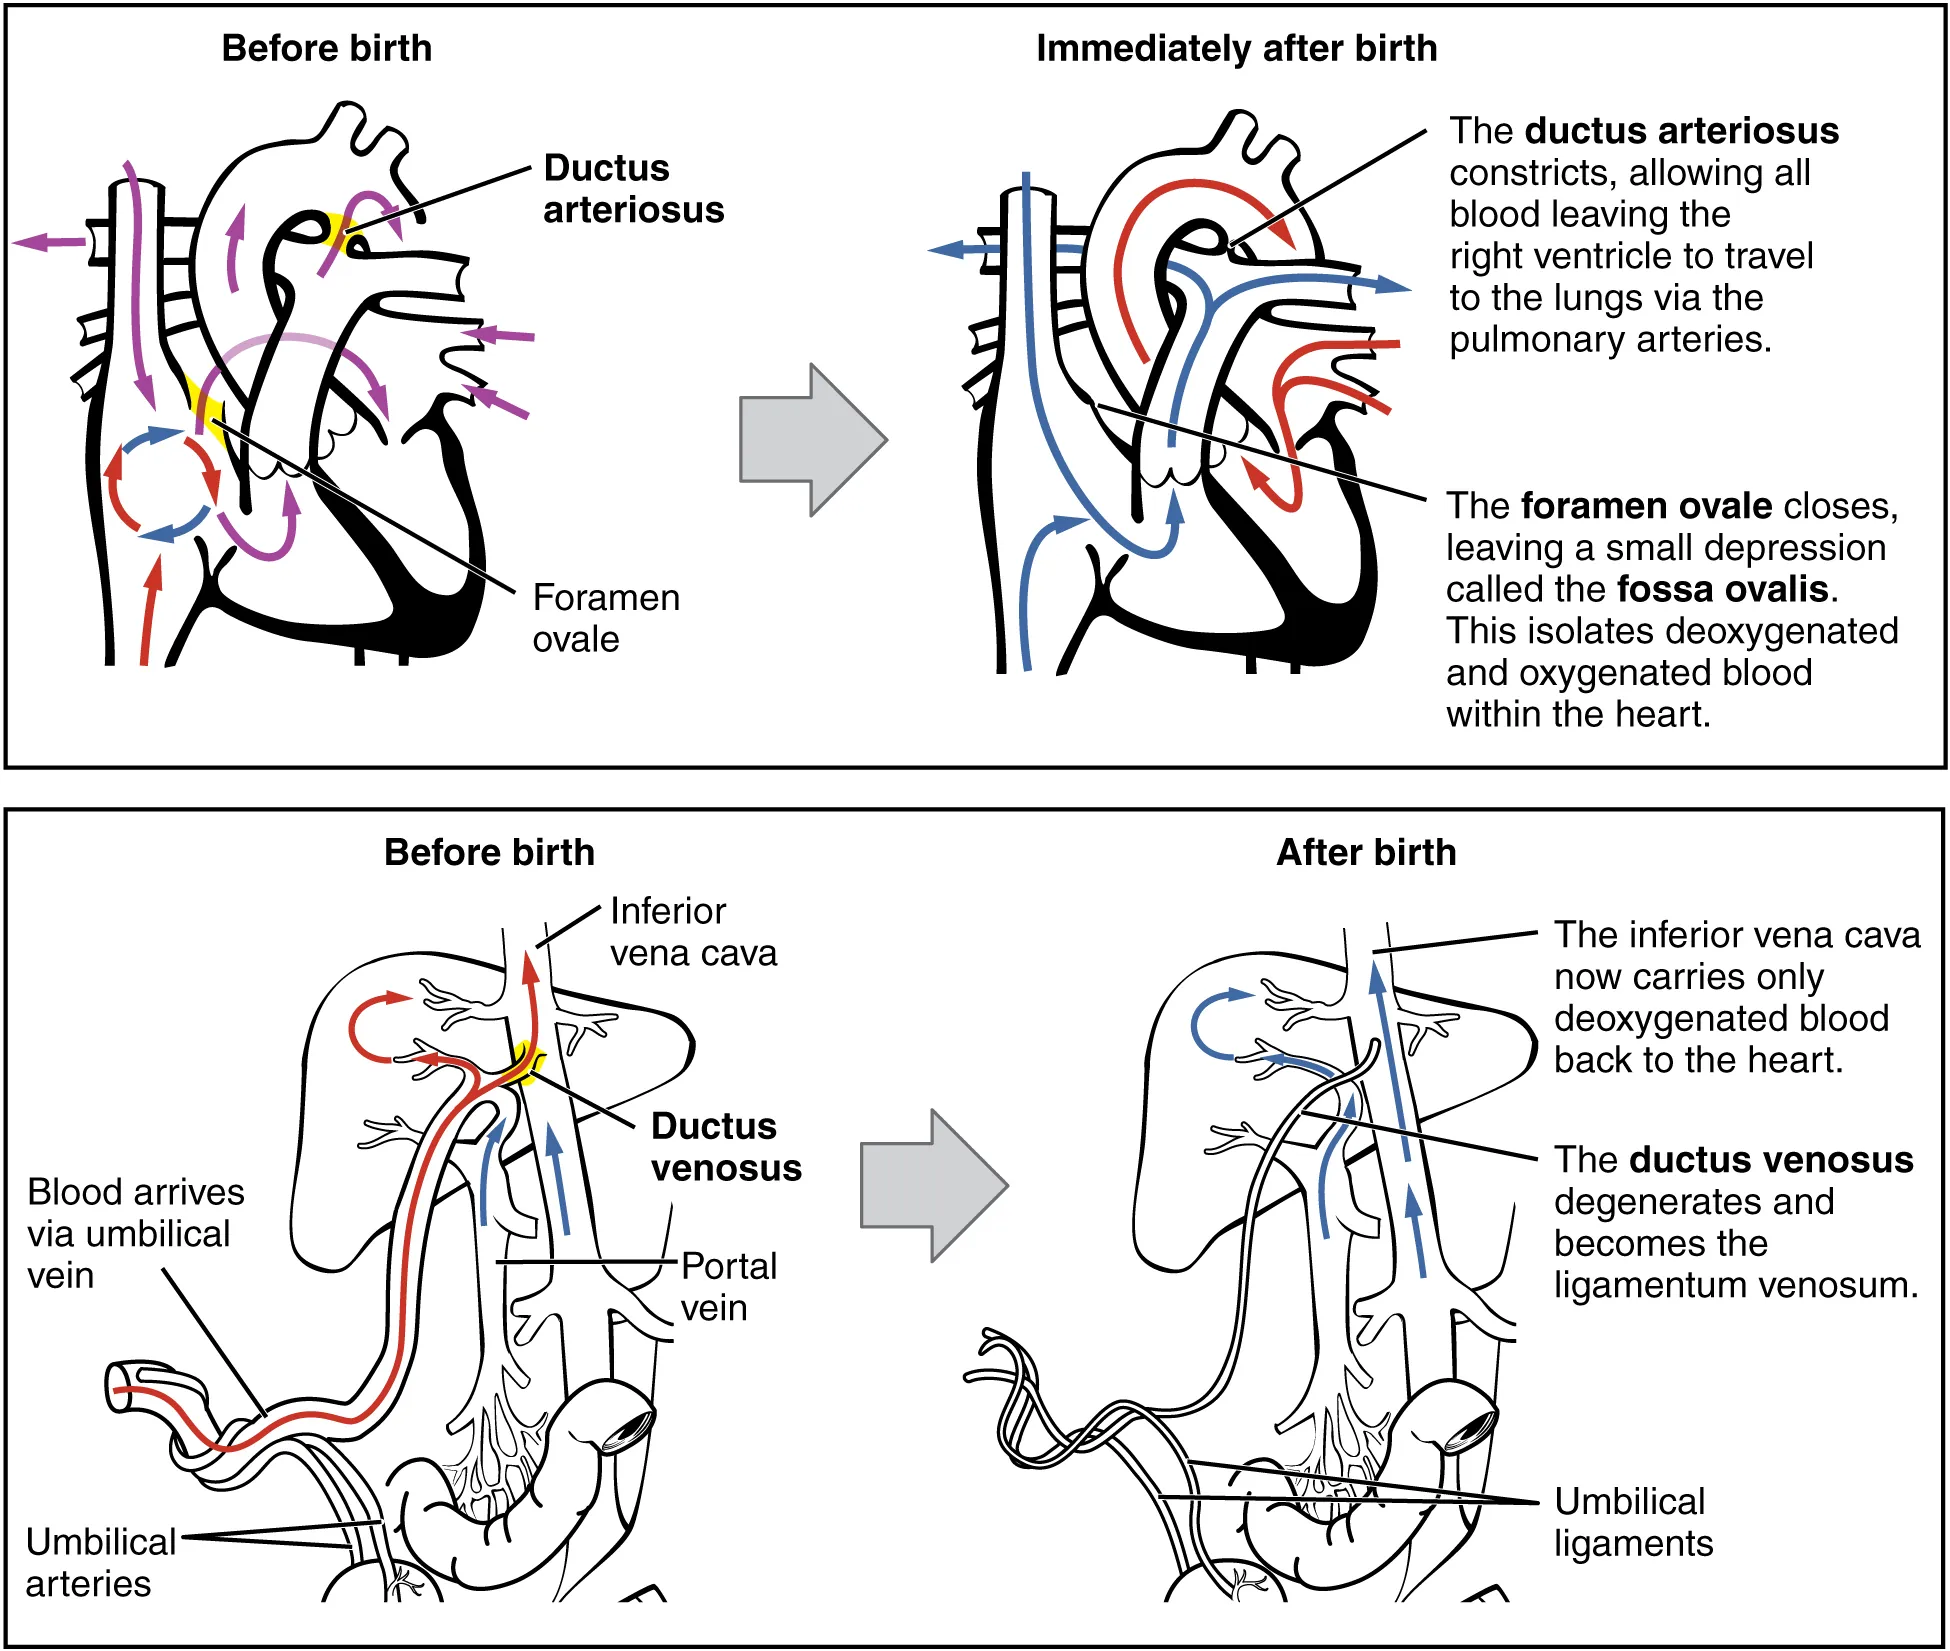 This figure illustrates the circulatory system in a newborn. The left image in both panels shows the blood circulation before birth and the right image shows the blood circulation after birth.